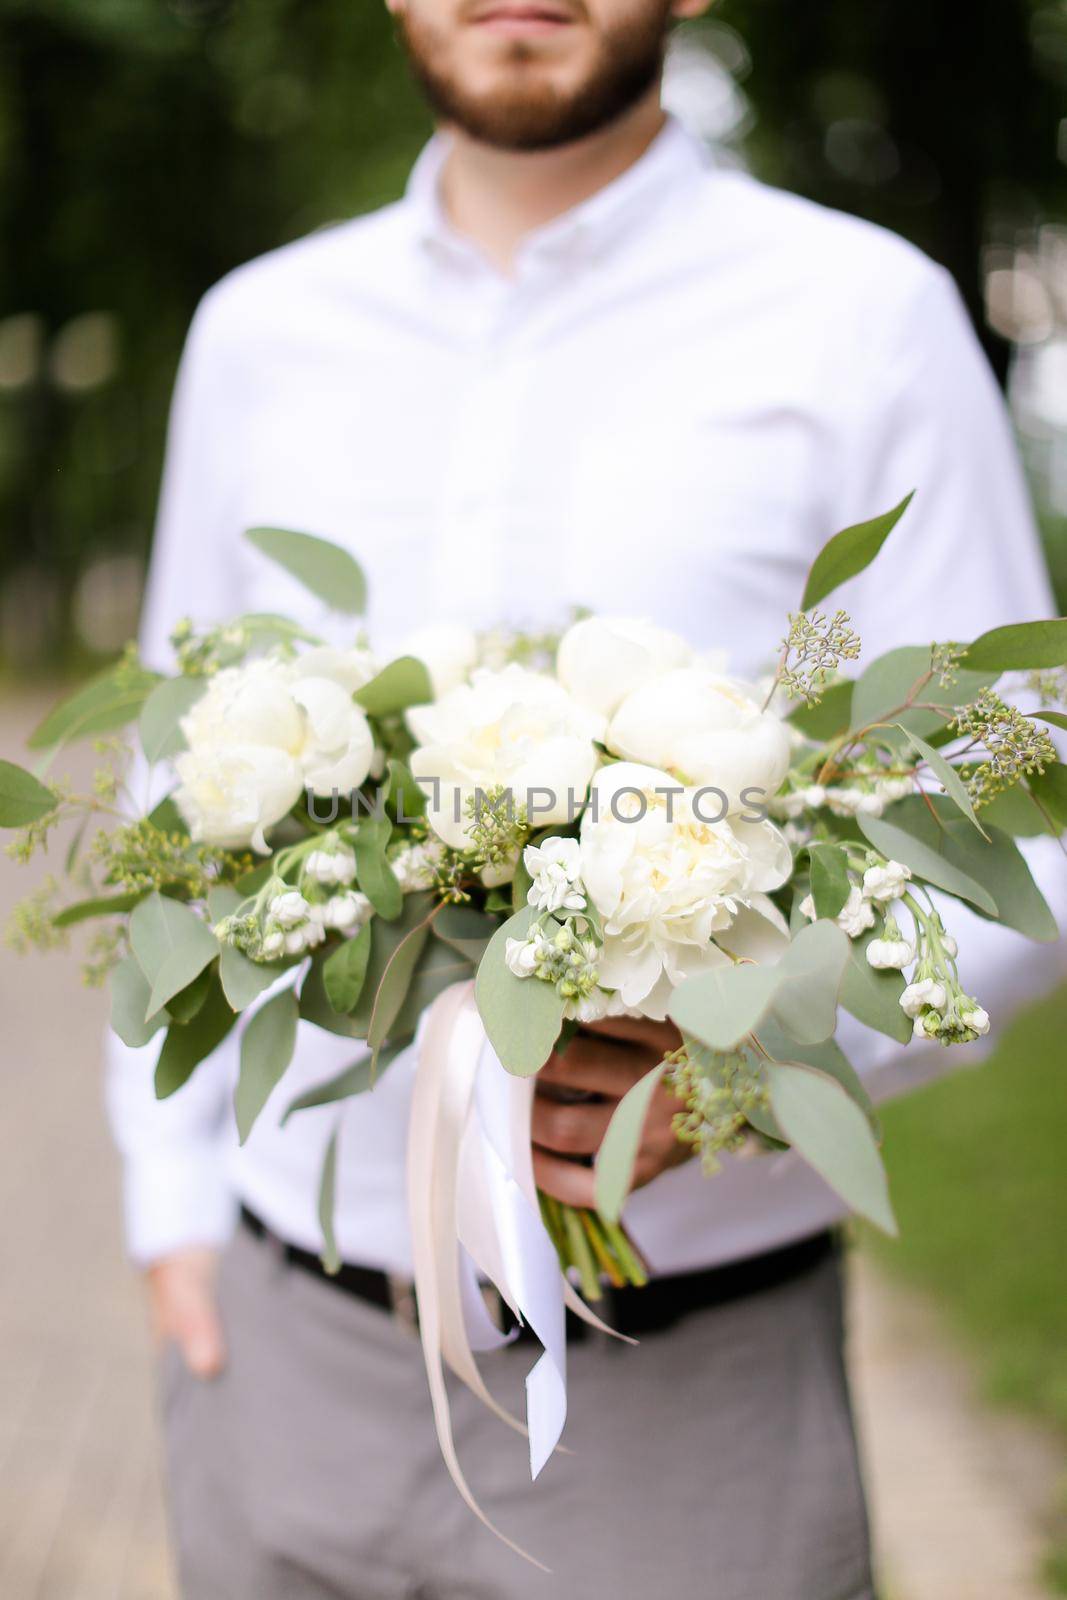 Caucasian groom wearing grey trousers and white shirt waiting for bride with bouquet of flowers. Concept of wedding photo session and floristic art.